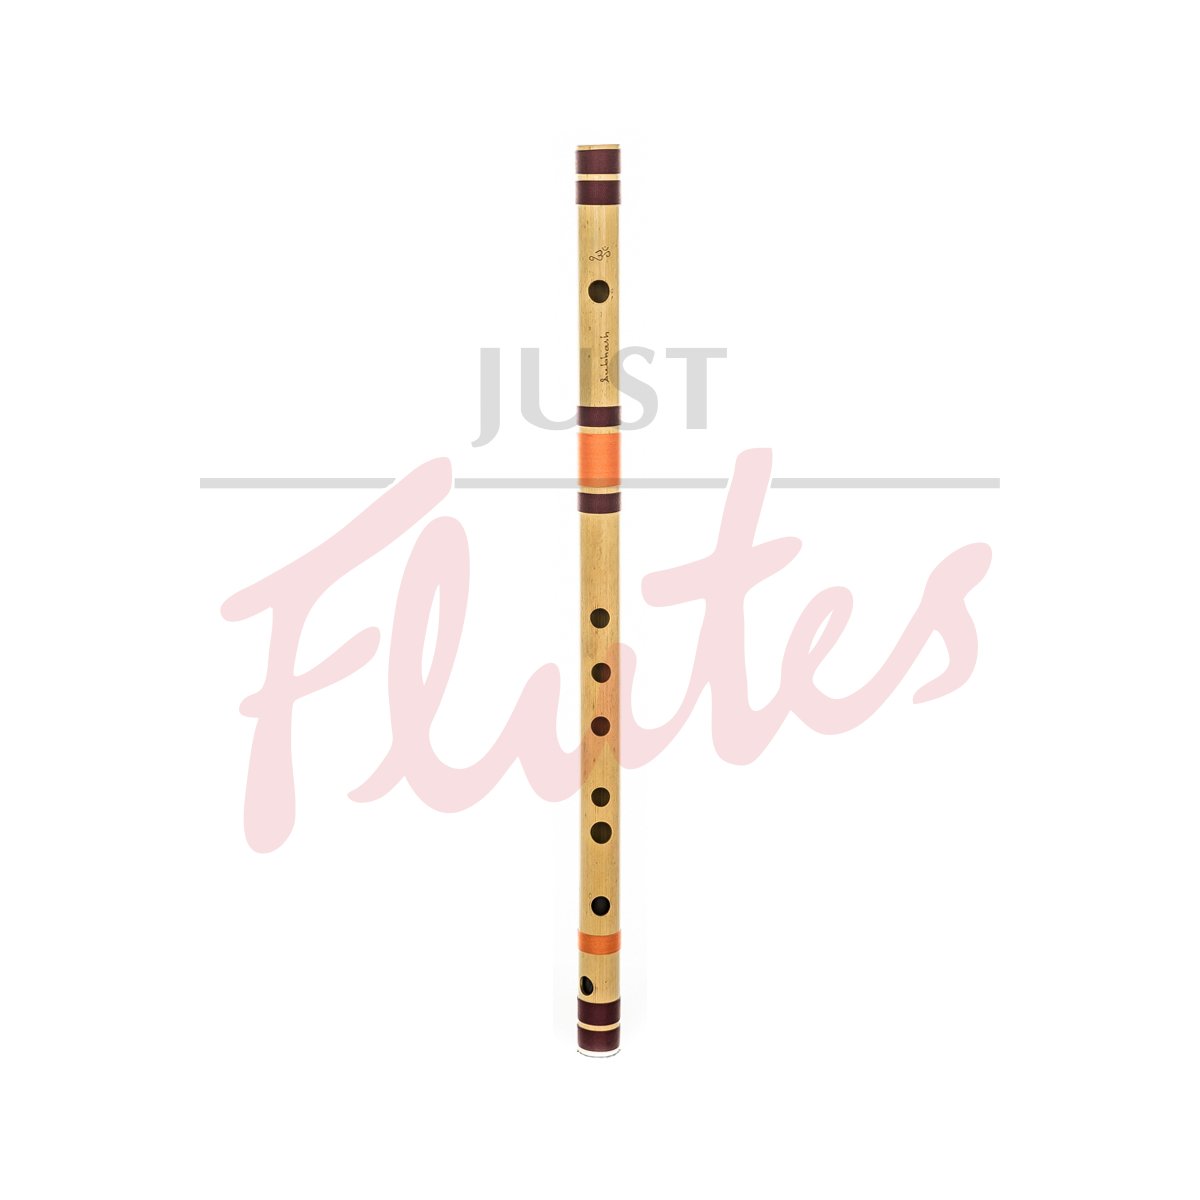 Subhash Student Bansuri in E (Indian A) 24 Inches